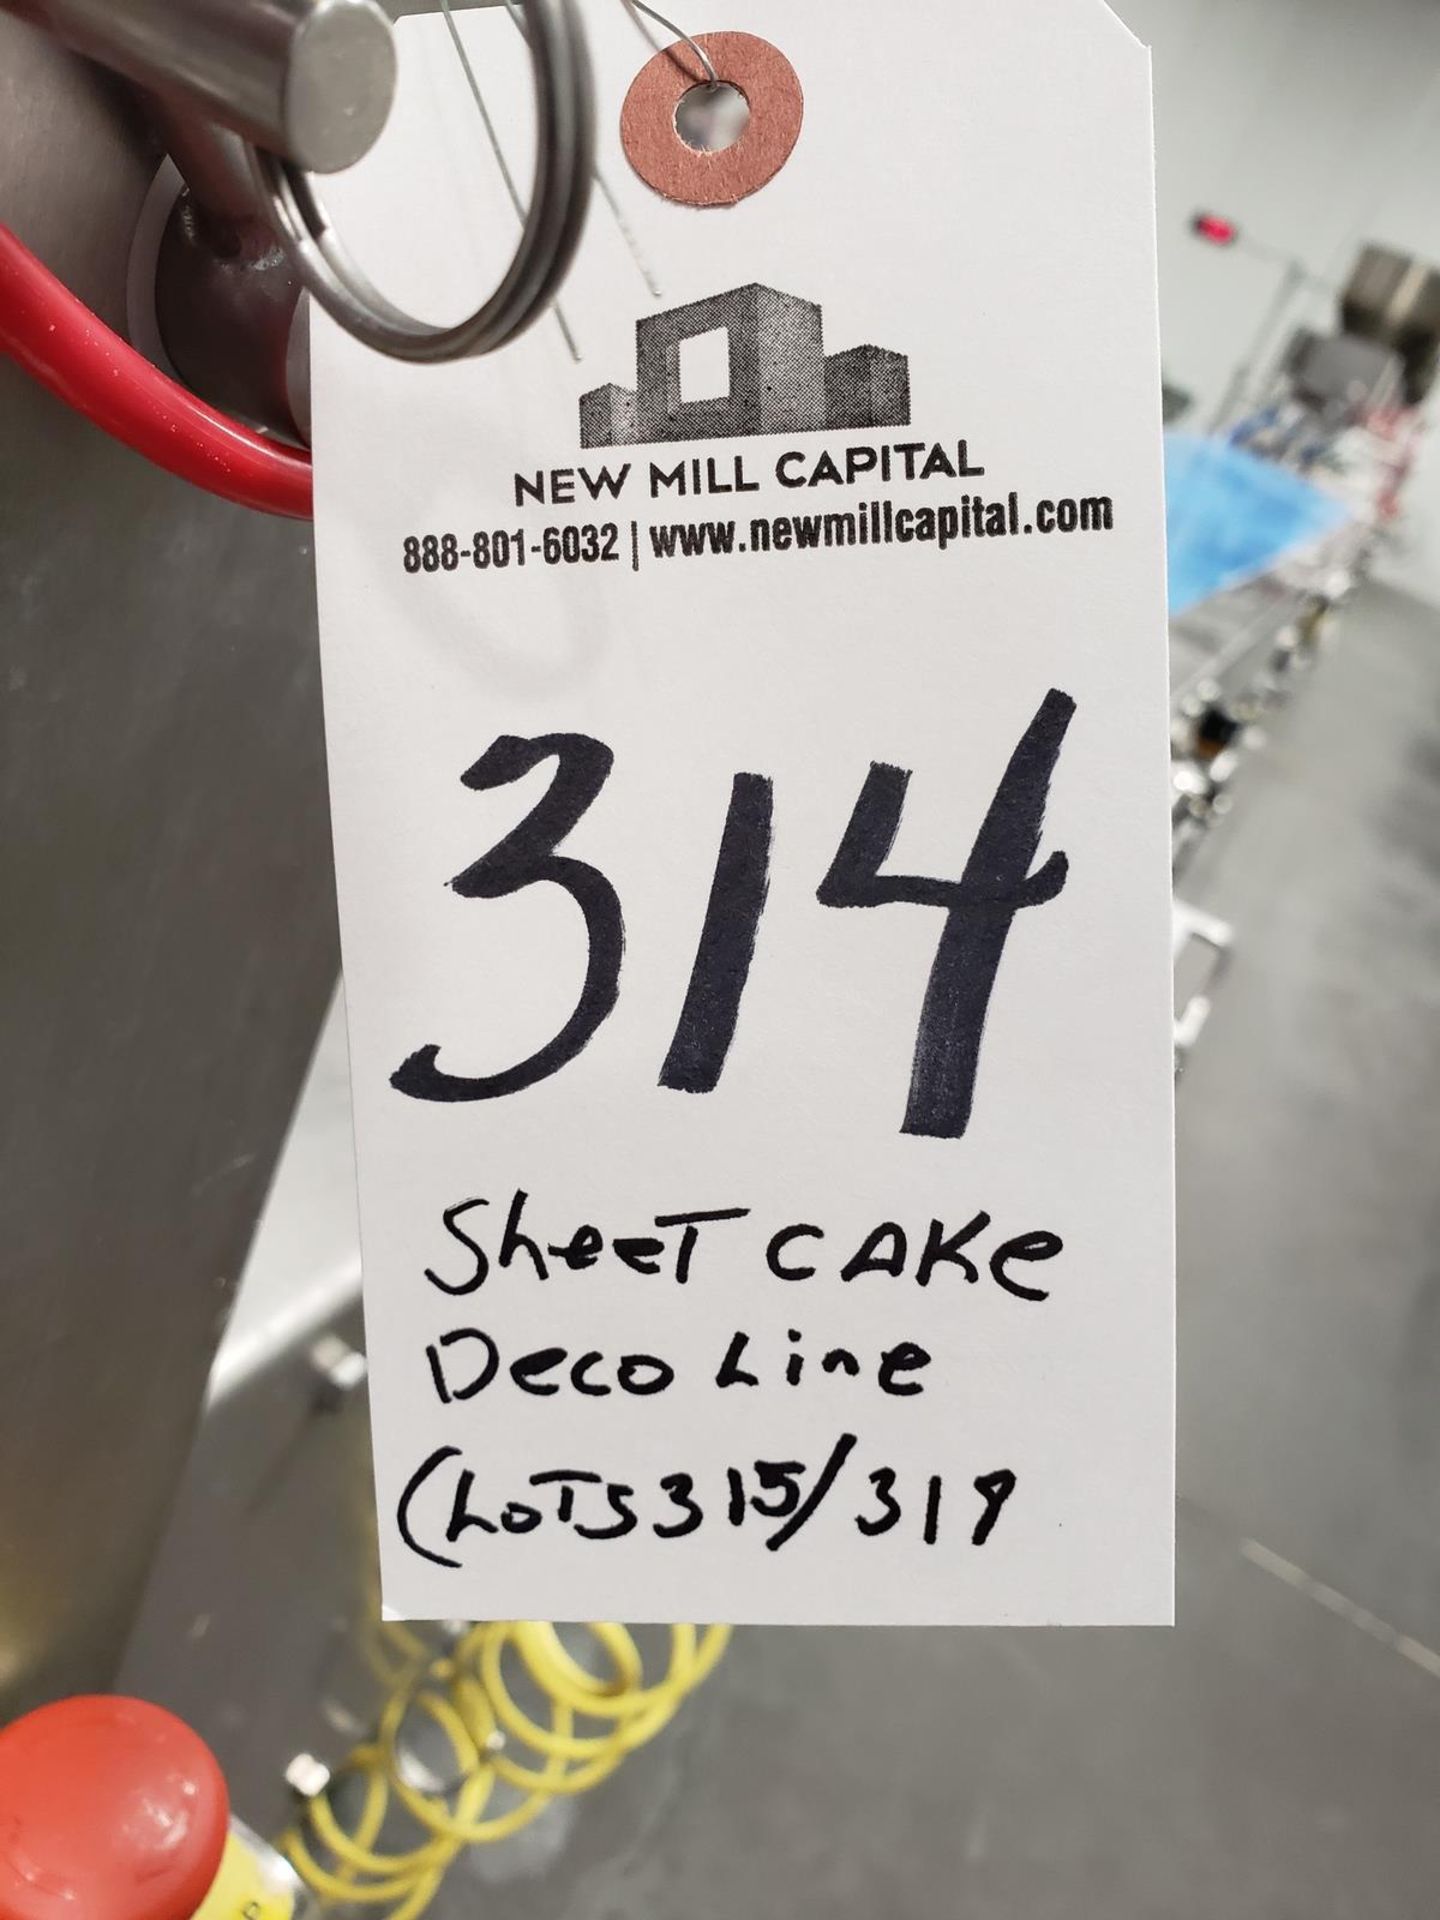 (Bulk Bid) 2019 Unifiller Sheet Cake Decorating Line, Includes Lots 315 - 318 - Subject to Piecemeal - Image 2 of 2